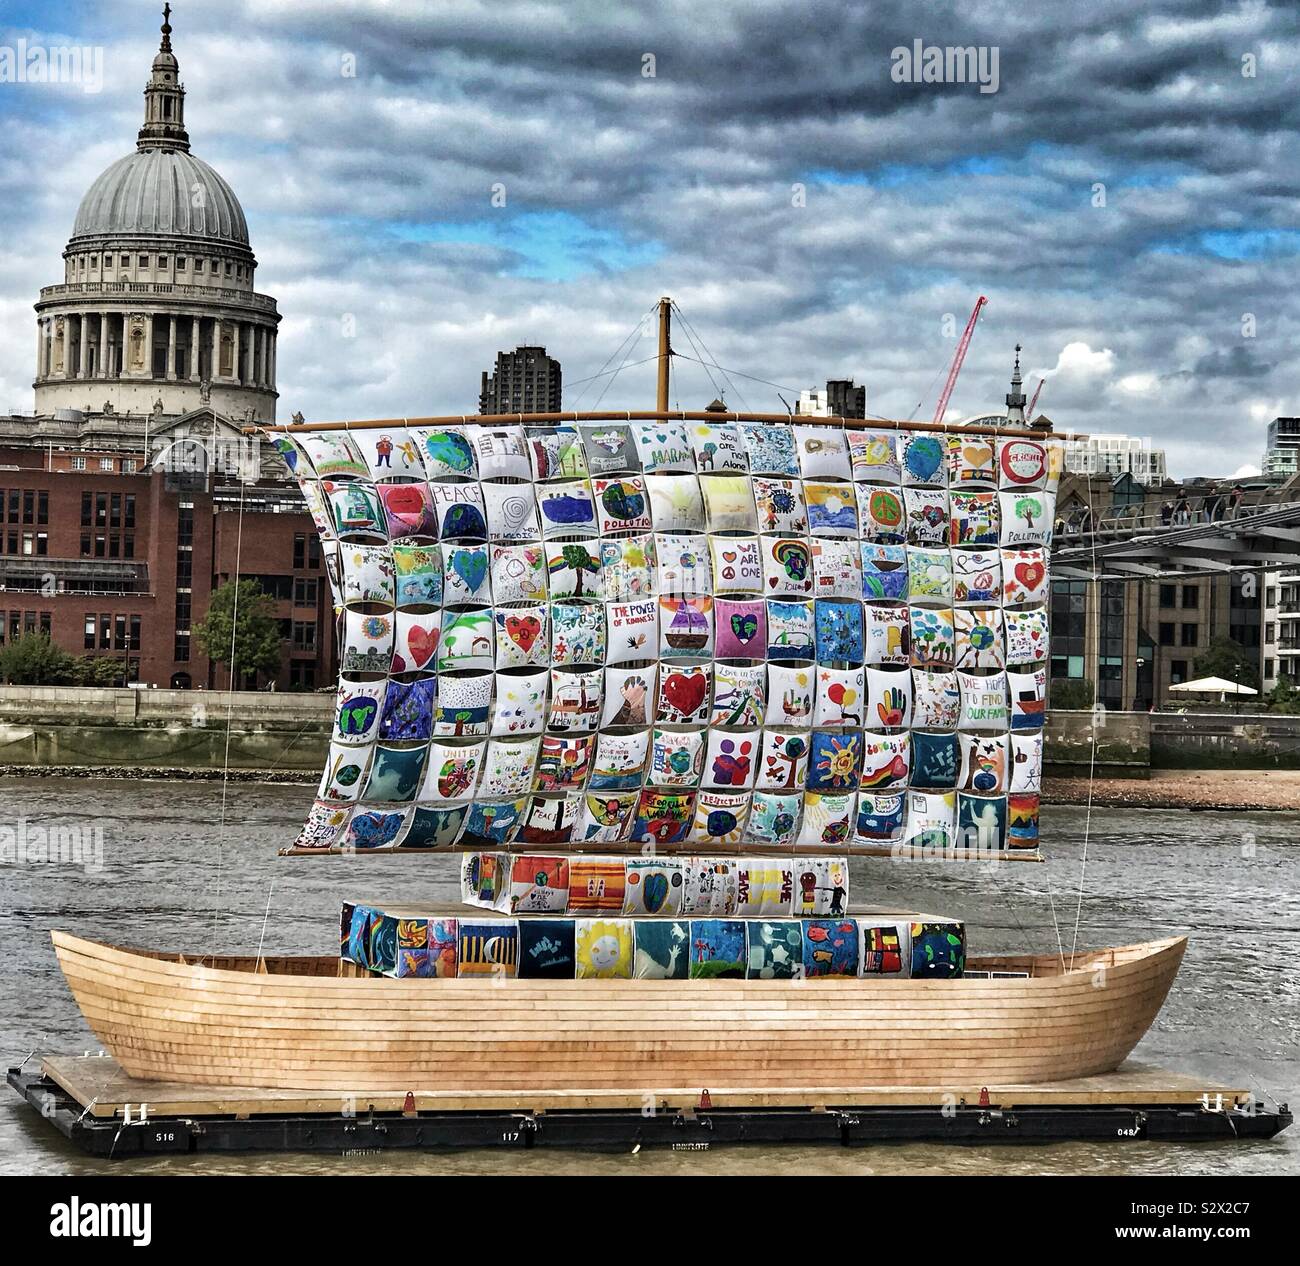 Ship Of Tolerance by Artists Emilia and Ilya Kabakov on The River Thames outside the Tate Modern with St.Pauls Cathedral behind - London UK Stock Photo